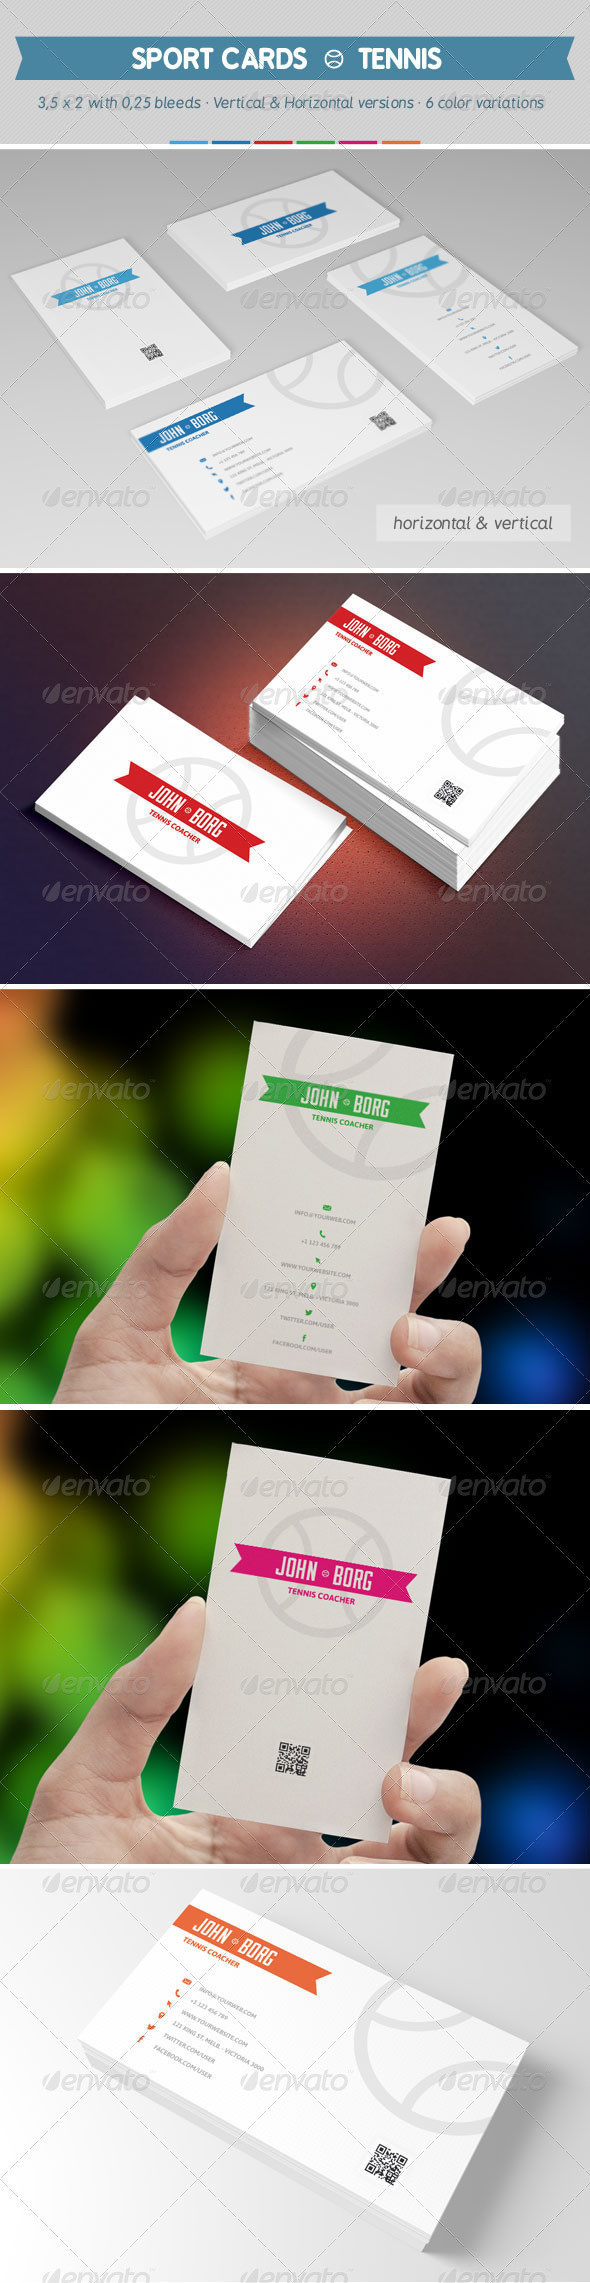 Image preview sport business cards tennis